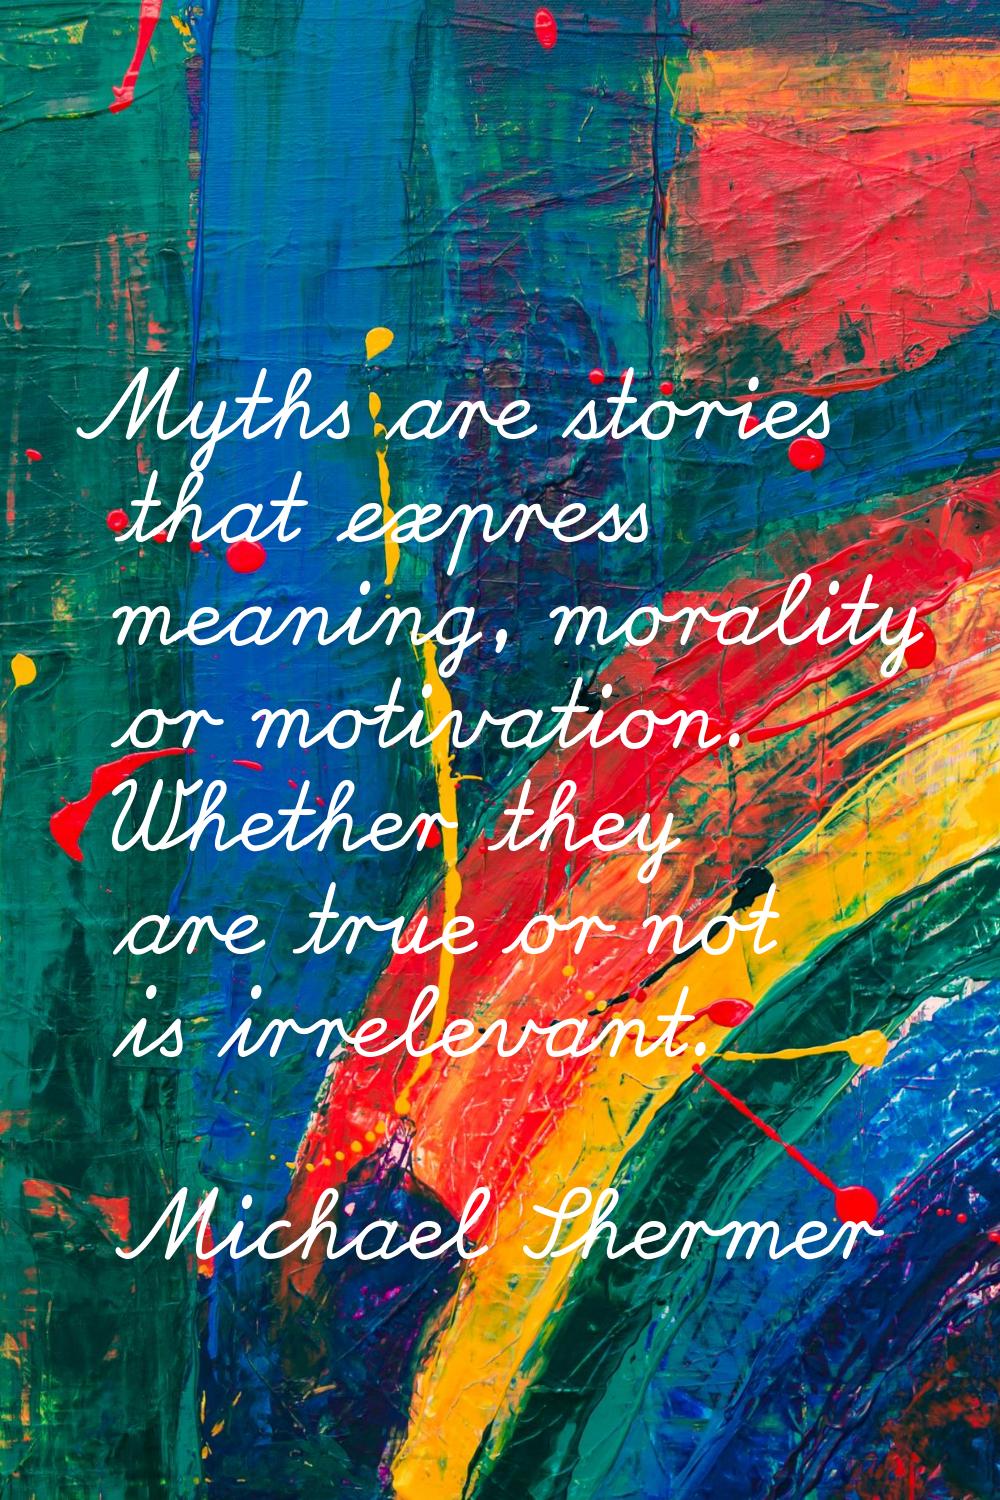 Myths are stories that express meaning, morality or motivation. Whether they are true or not is irr